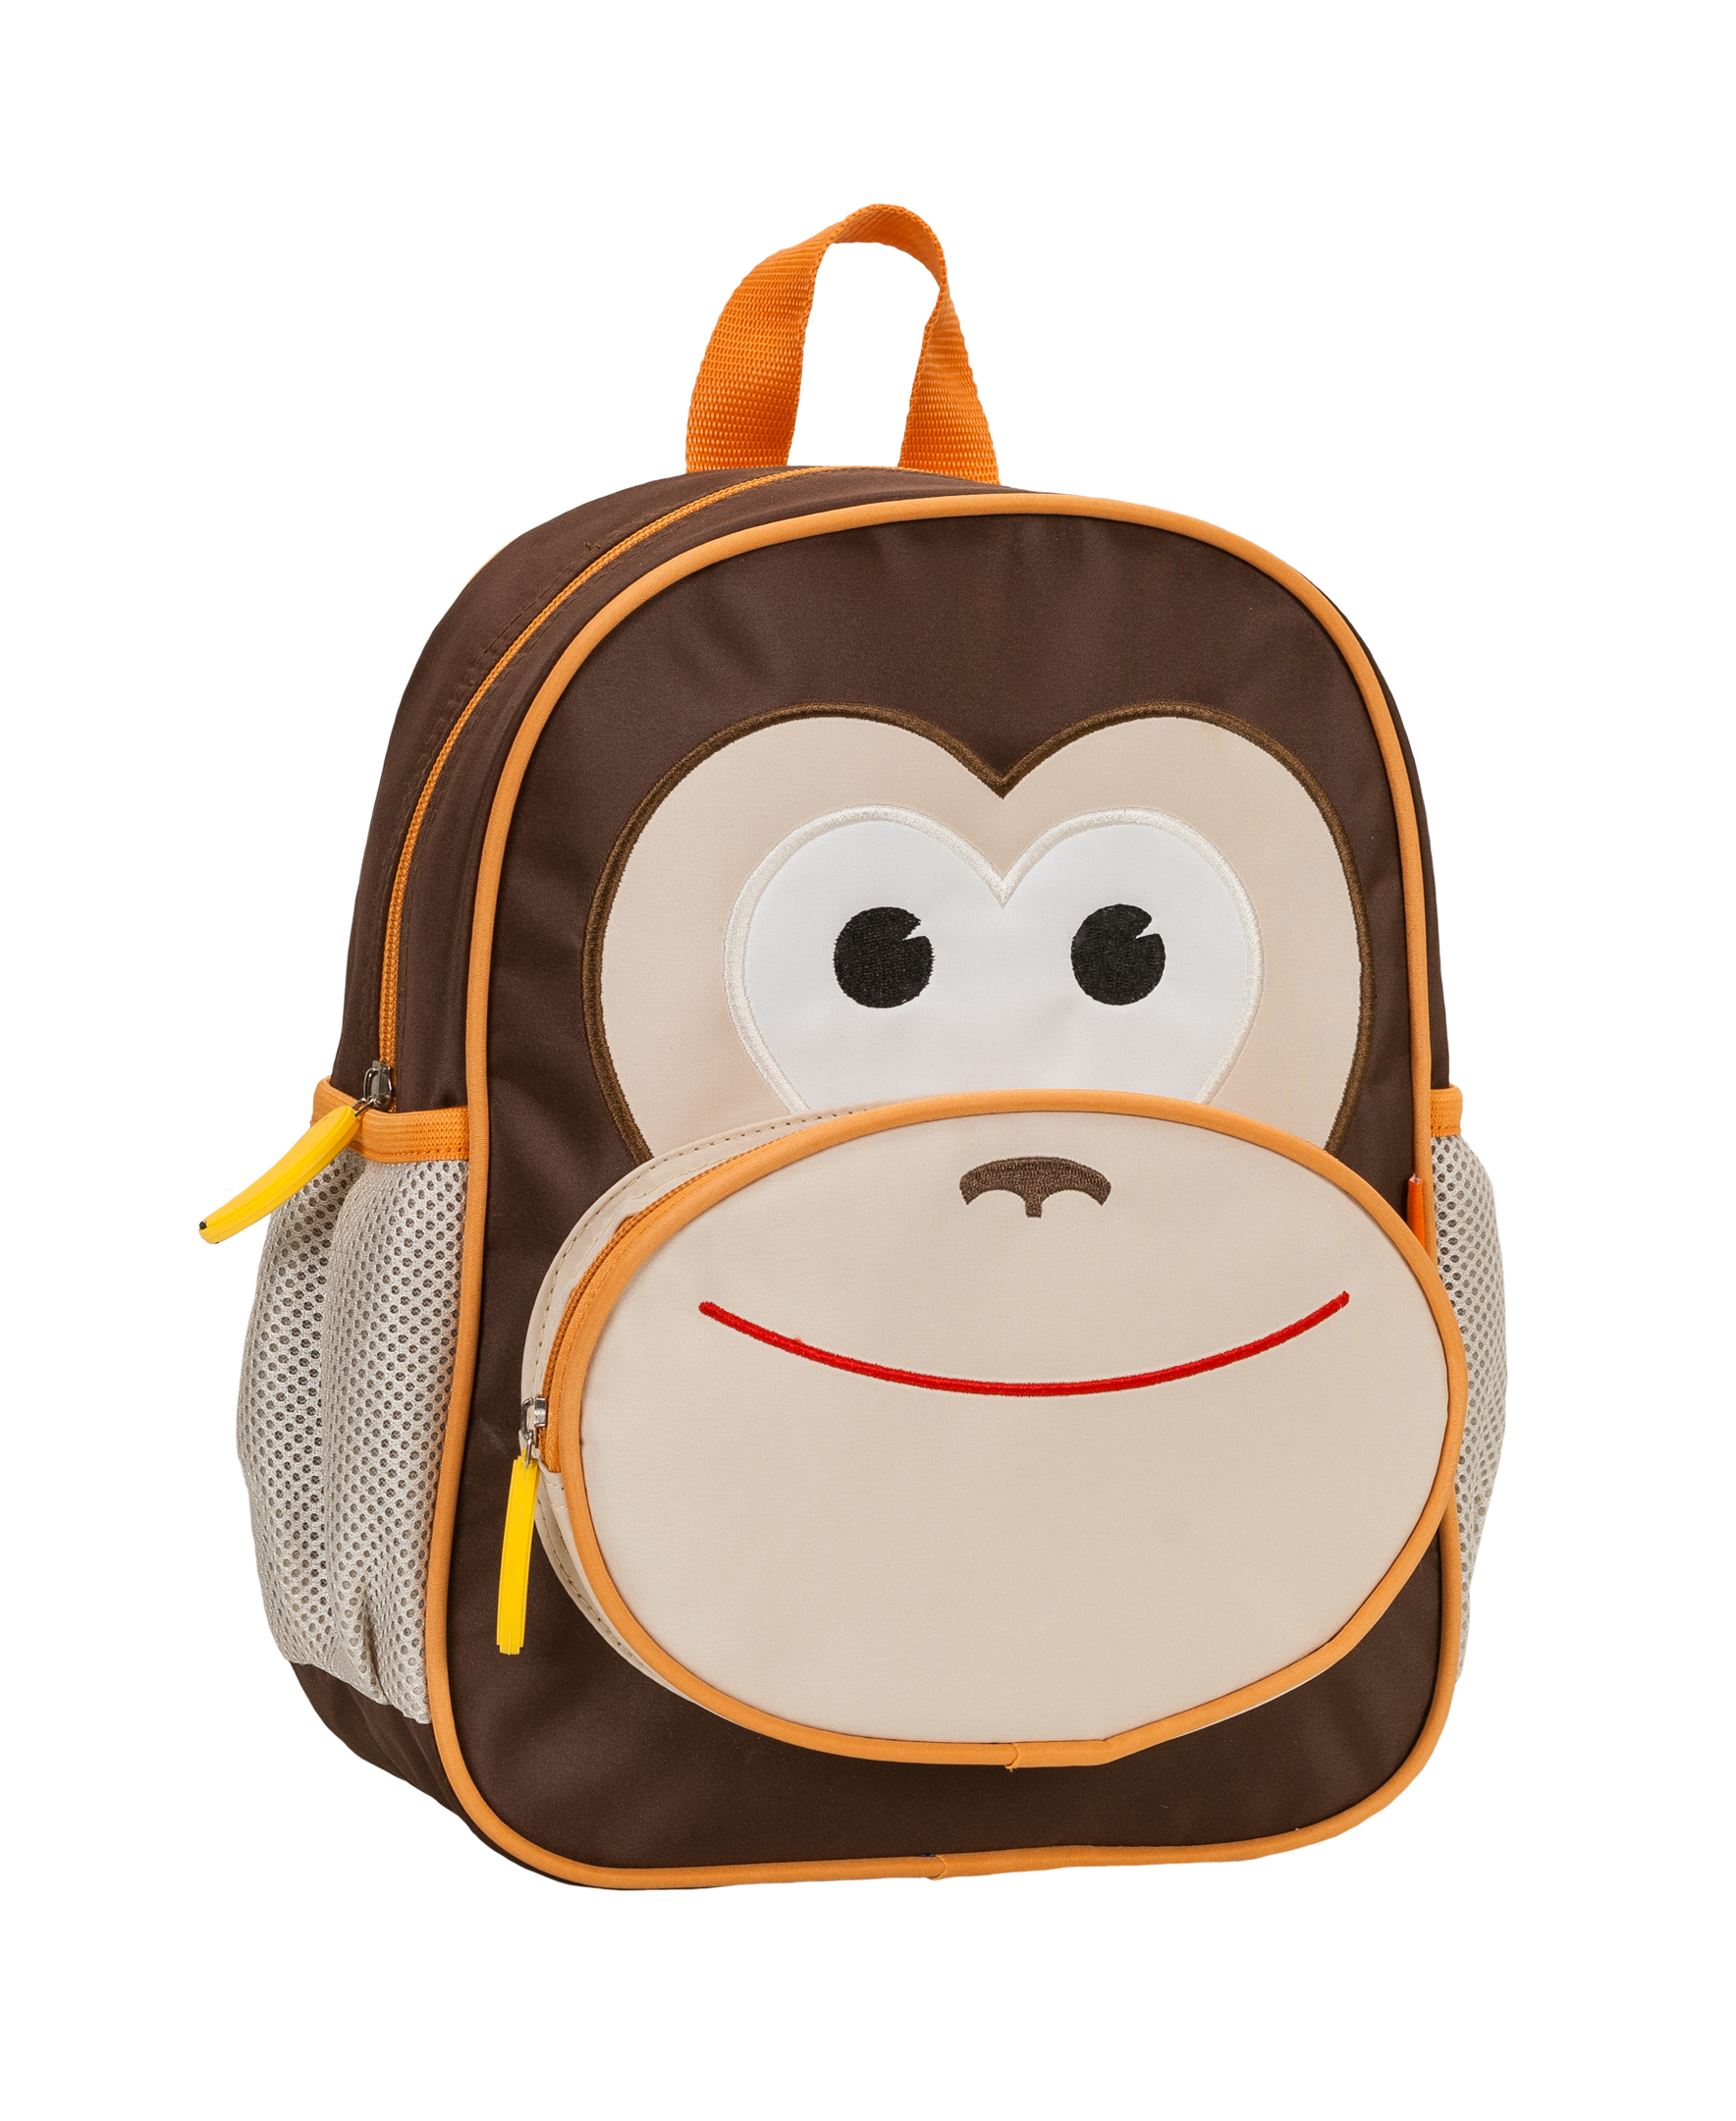 Rockland Luggage "My First Backpack" Kids Backpack - image 1 of 8